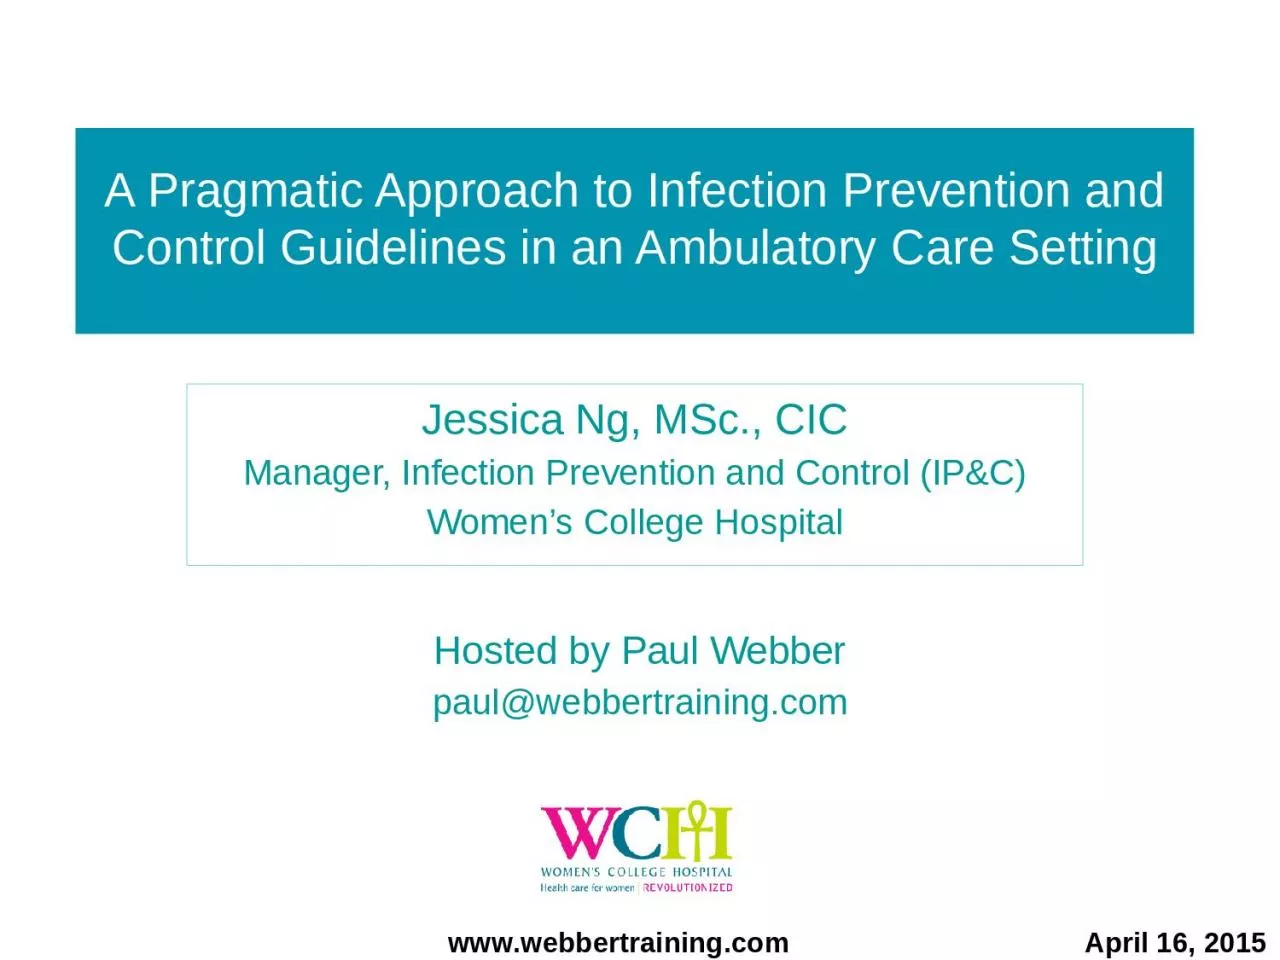 A Pragmatic Approach to Infection Prevention and Control Guidelines in an Ambulatory Care